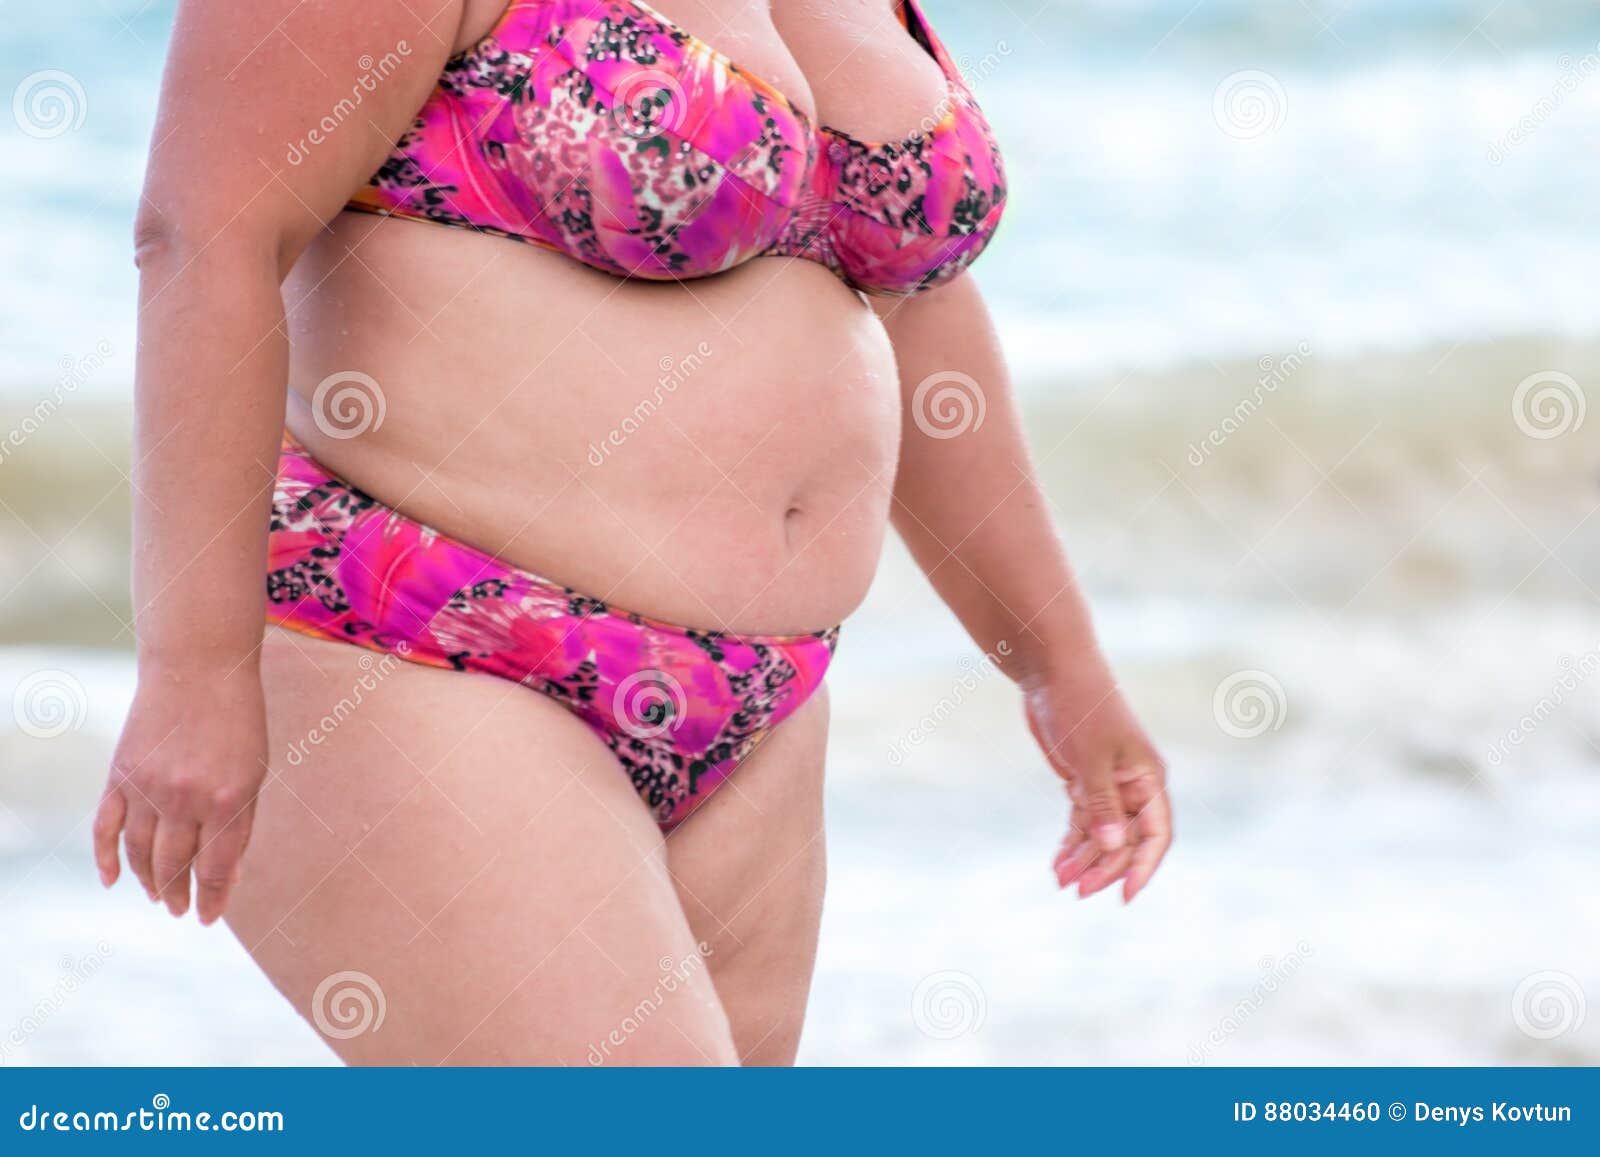 claudia meeks add pictures of fat women in bikinis photo